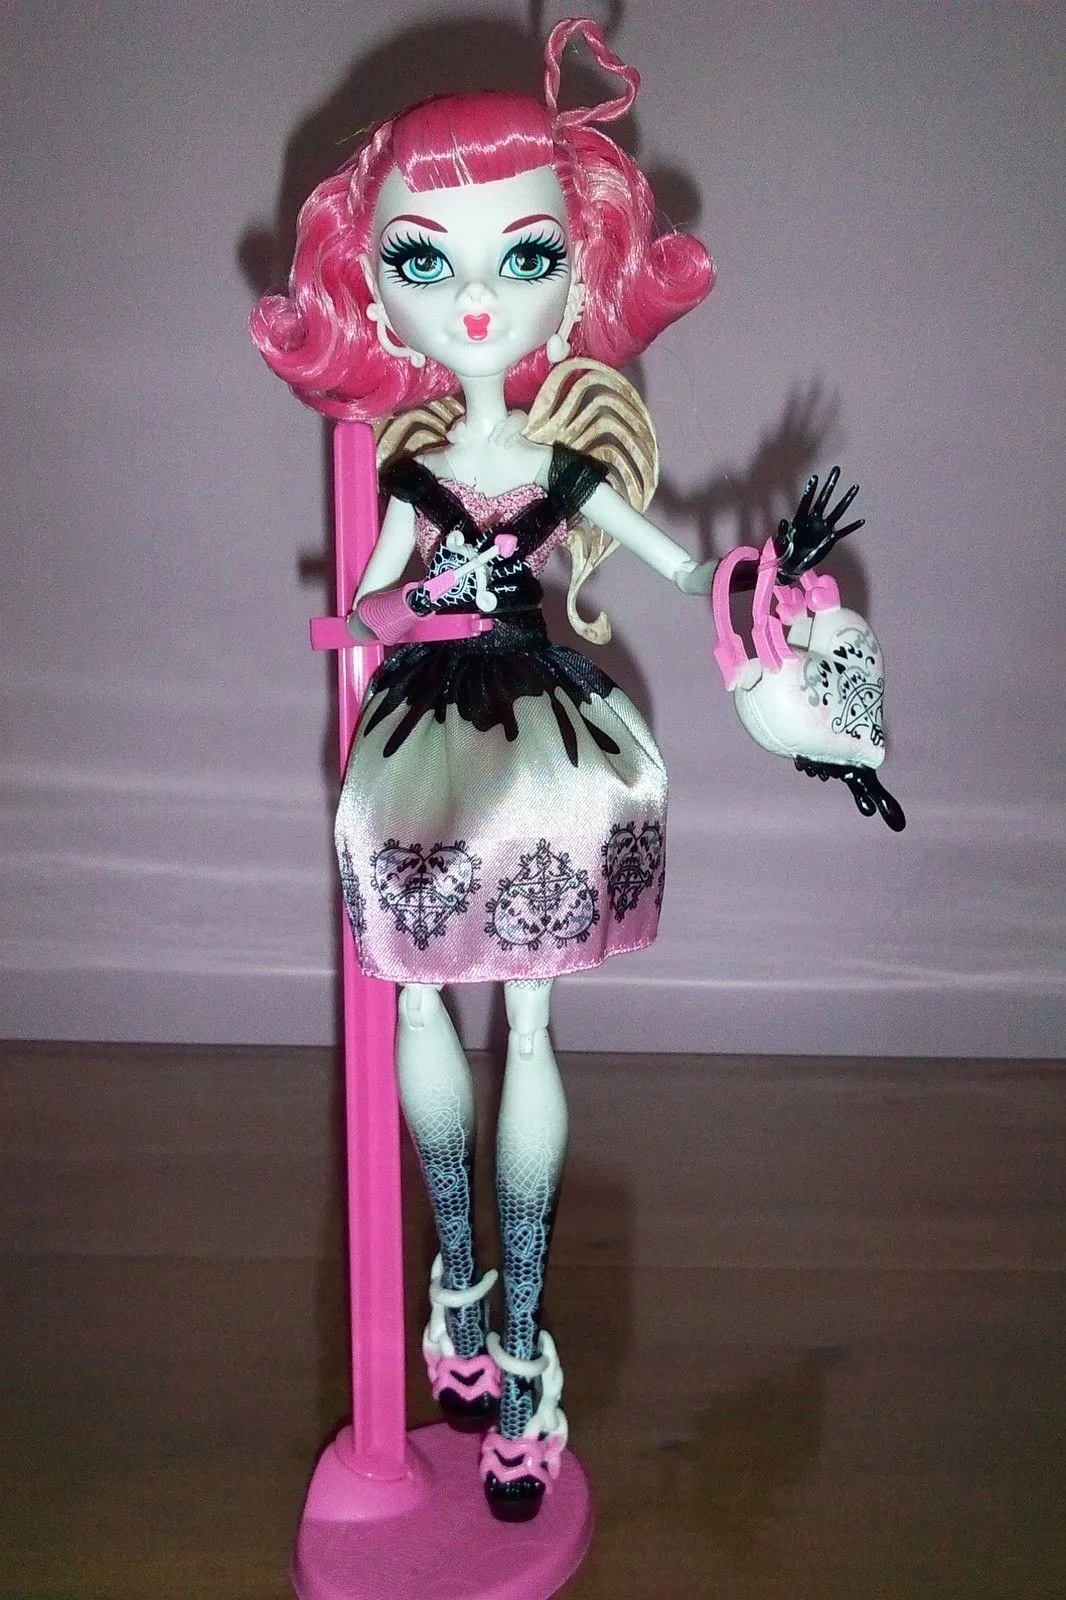 Monster High - C. A. Cupid | Flickr - Photo Sharing!